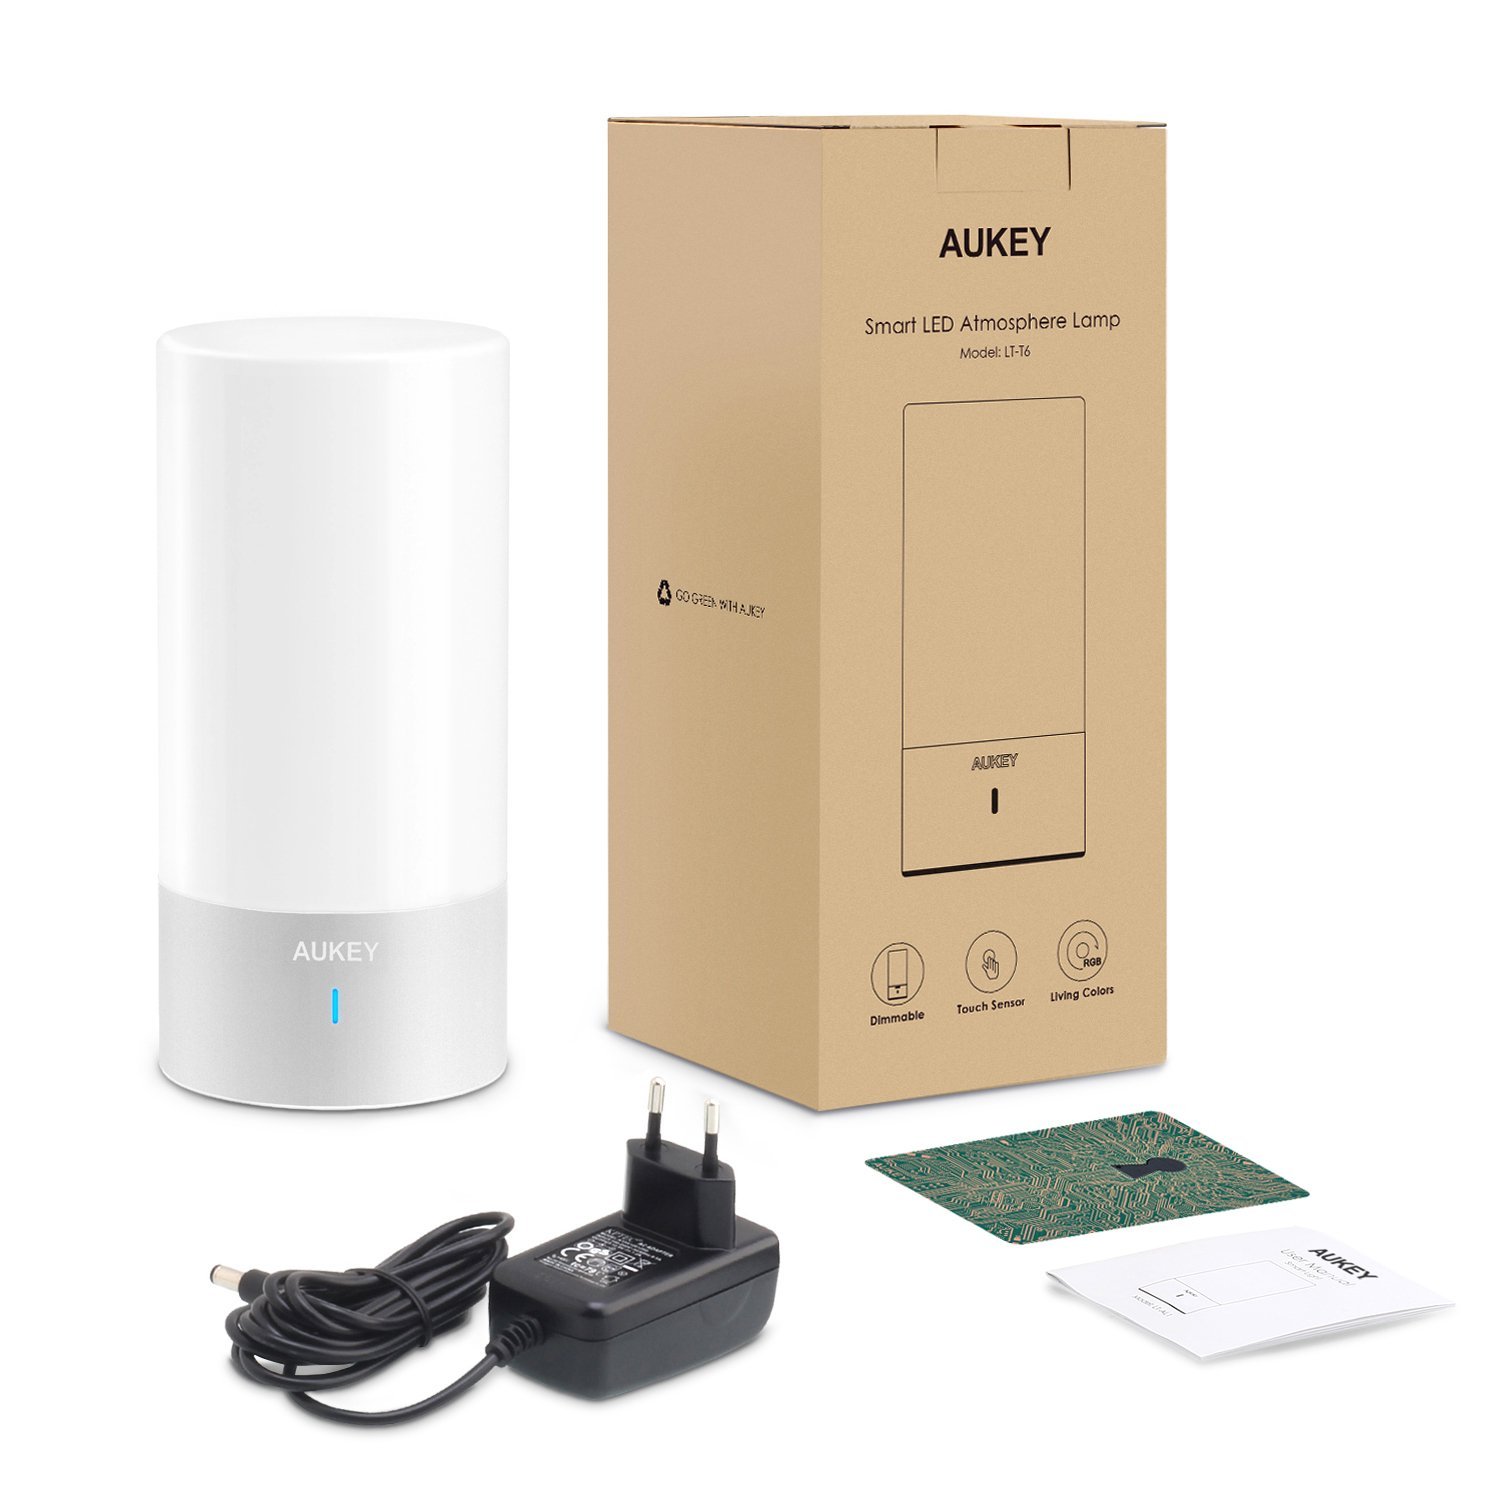 AUKEY: Smart LED Atmosphere Lamp [Recensione]